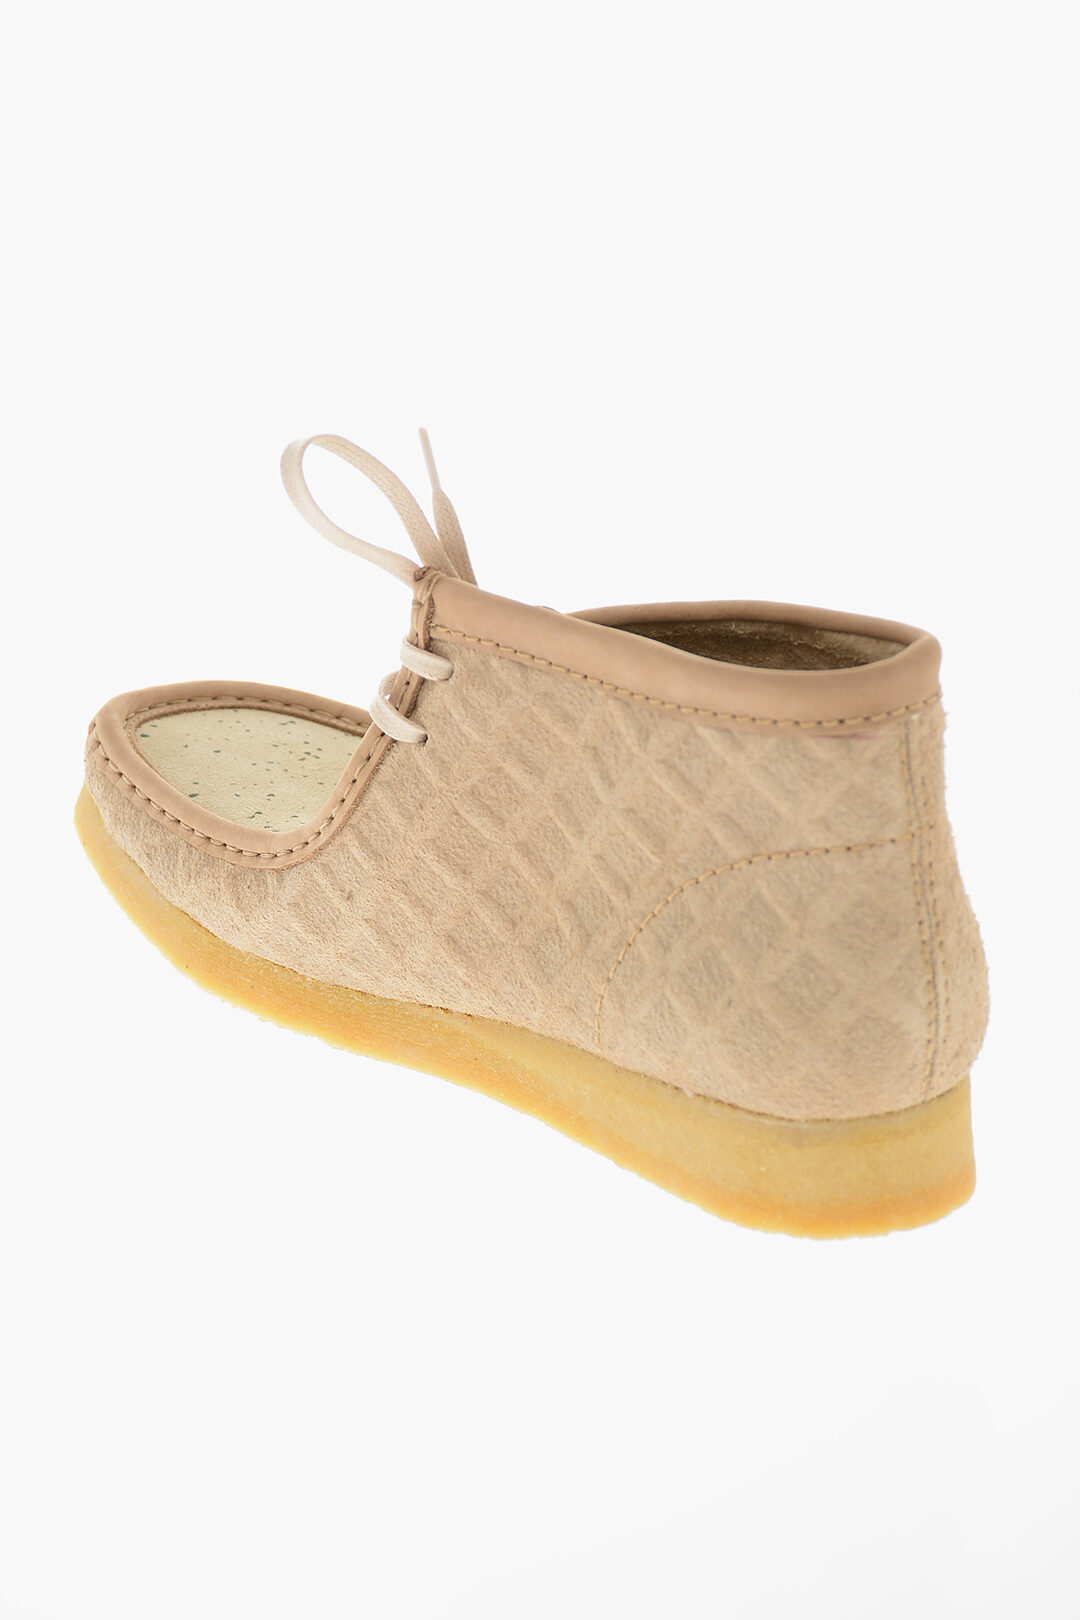 Clarks SWEET CHICK and Effect Suede WALLABEE Desert Boots men - Glamood Outlet